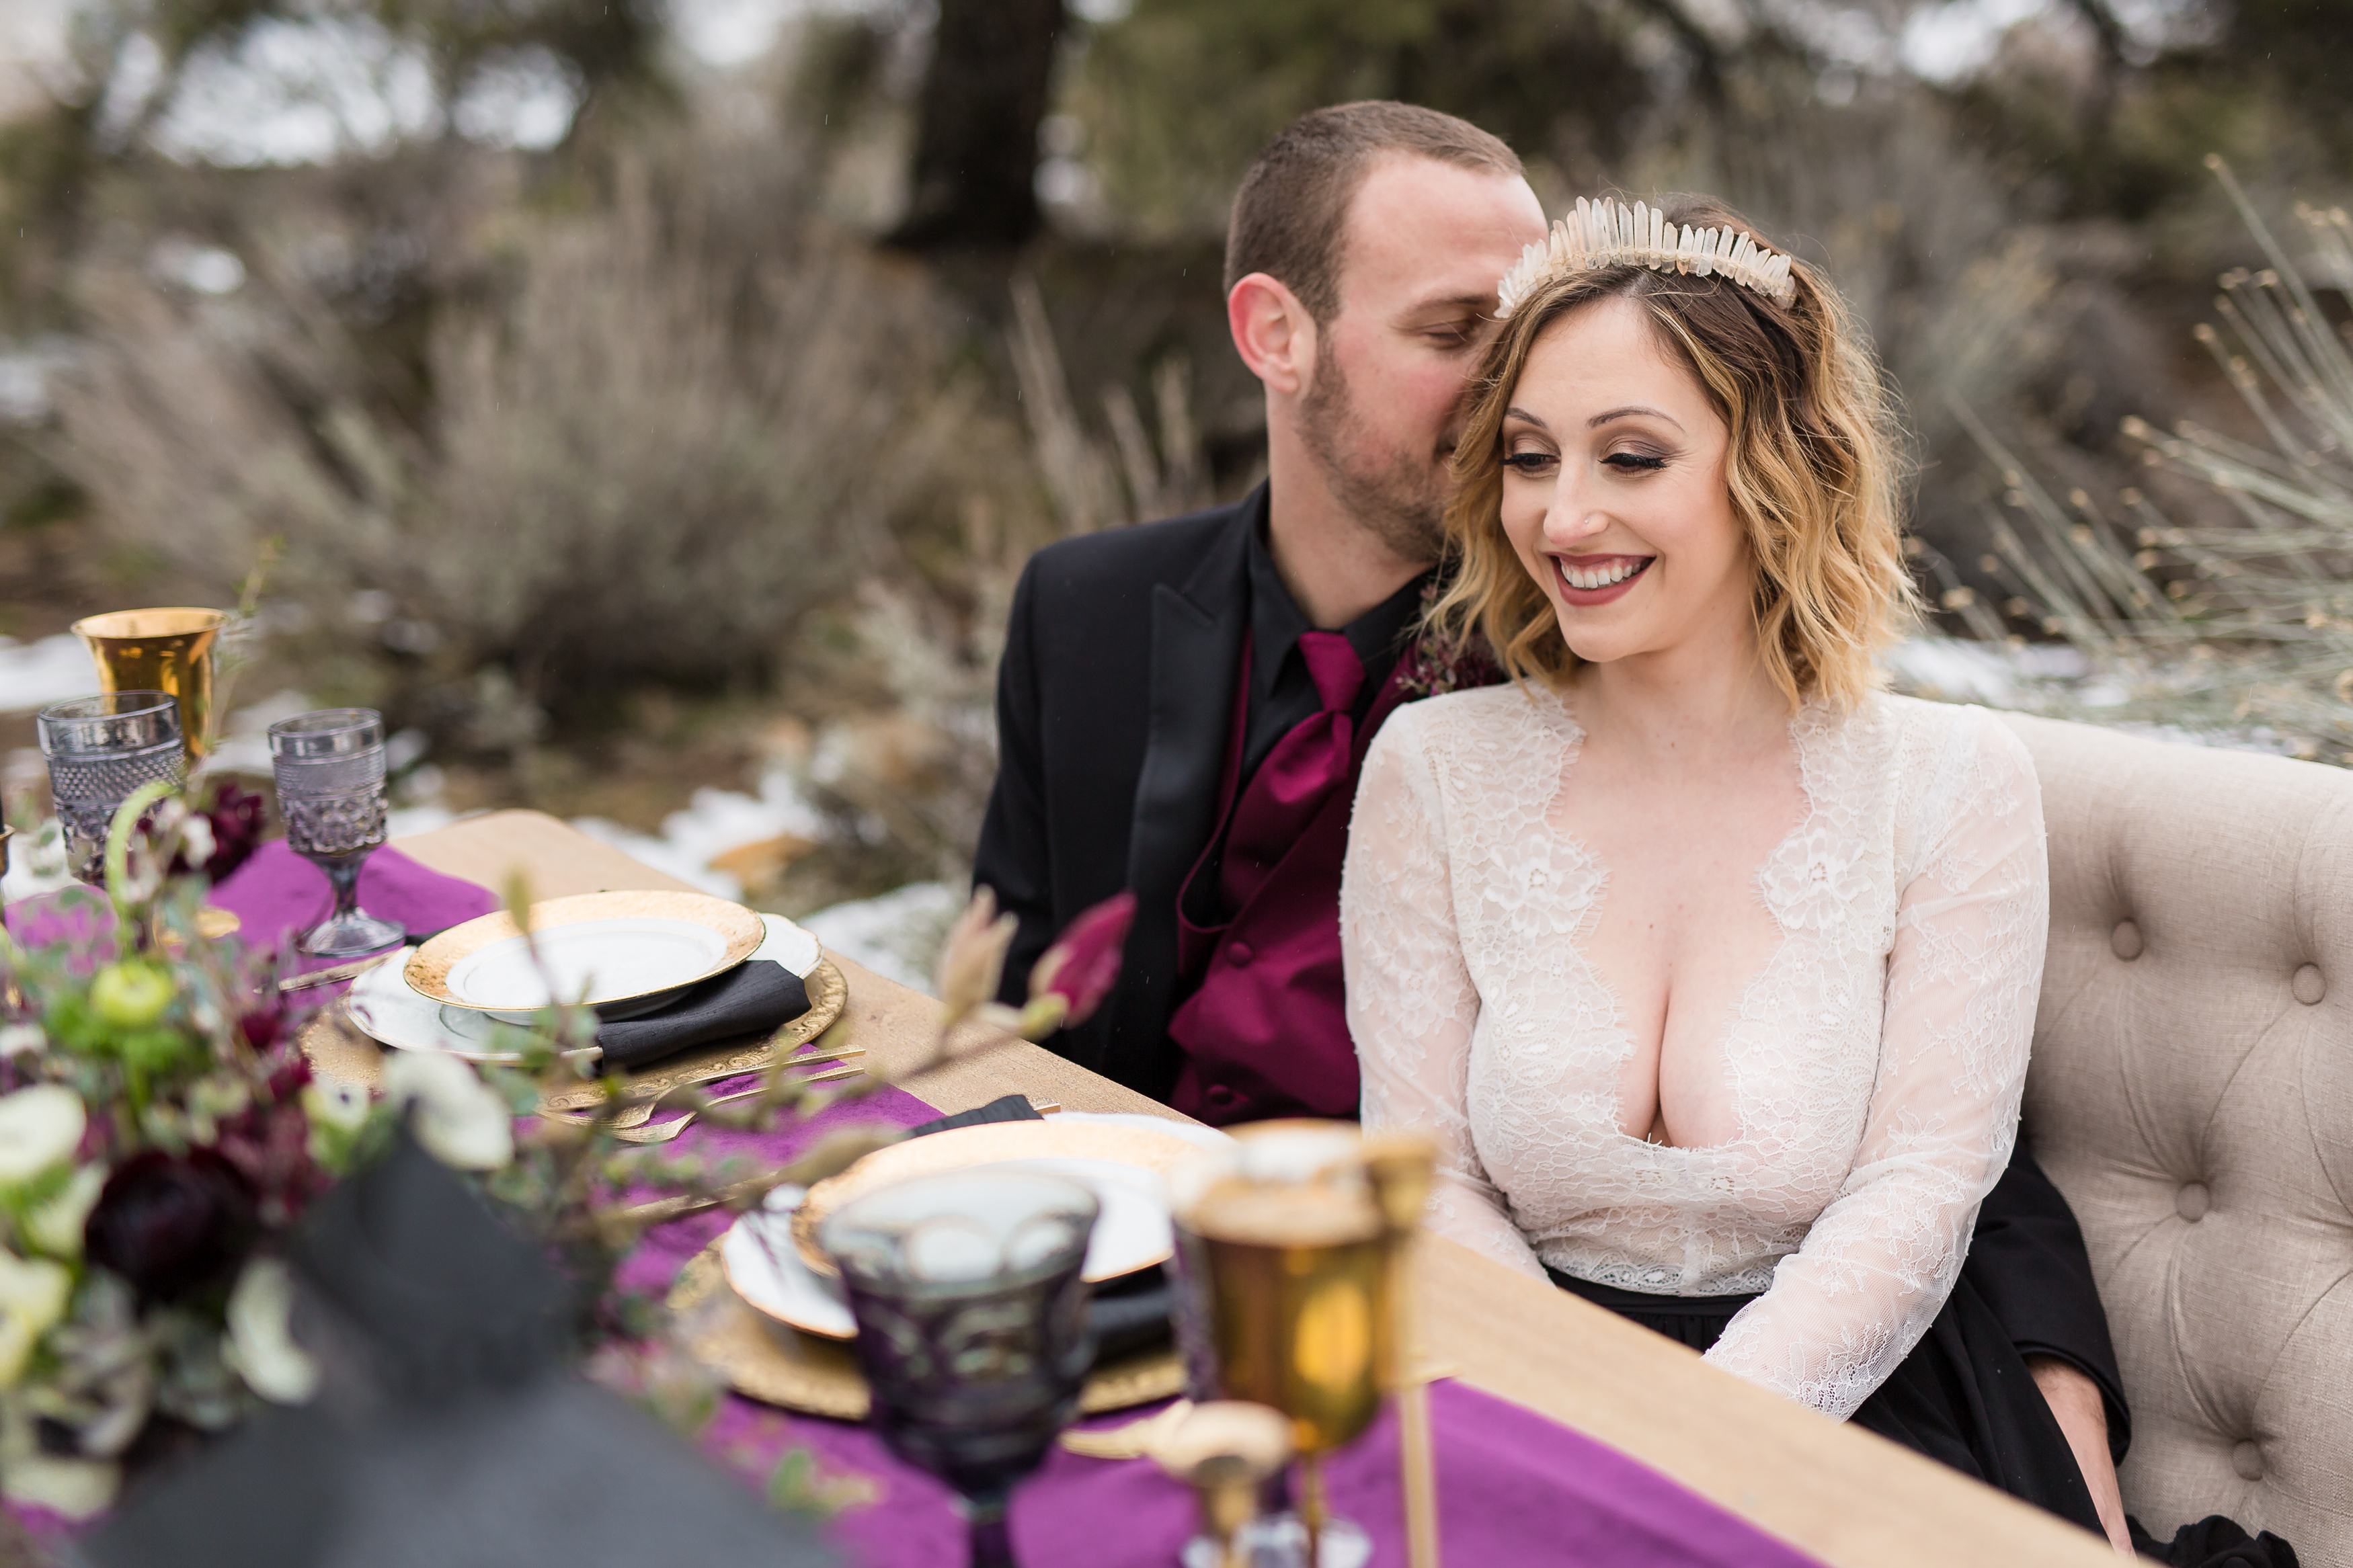 Man whispering into woman's ear on couch by sweetheart table